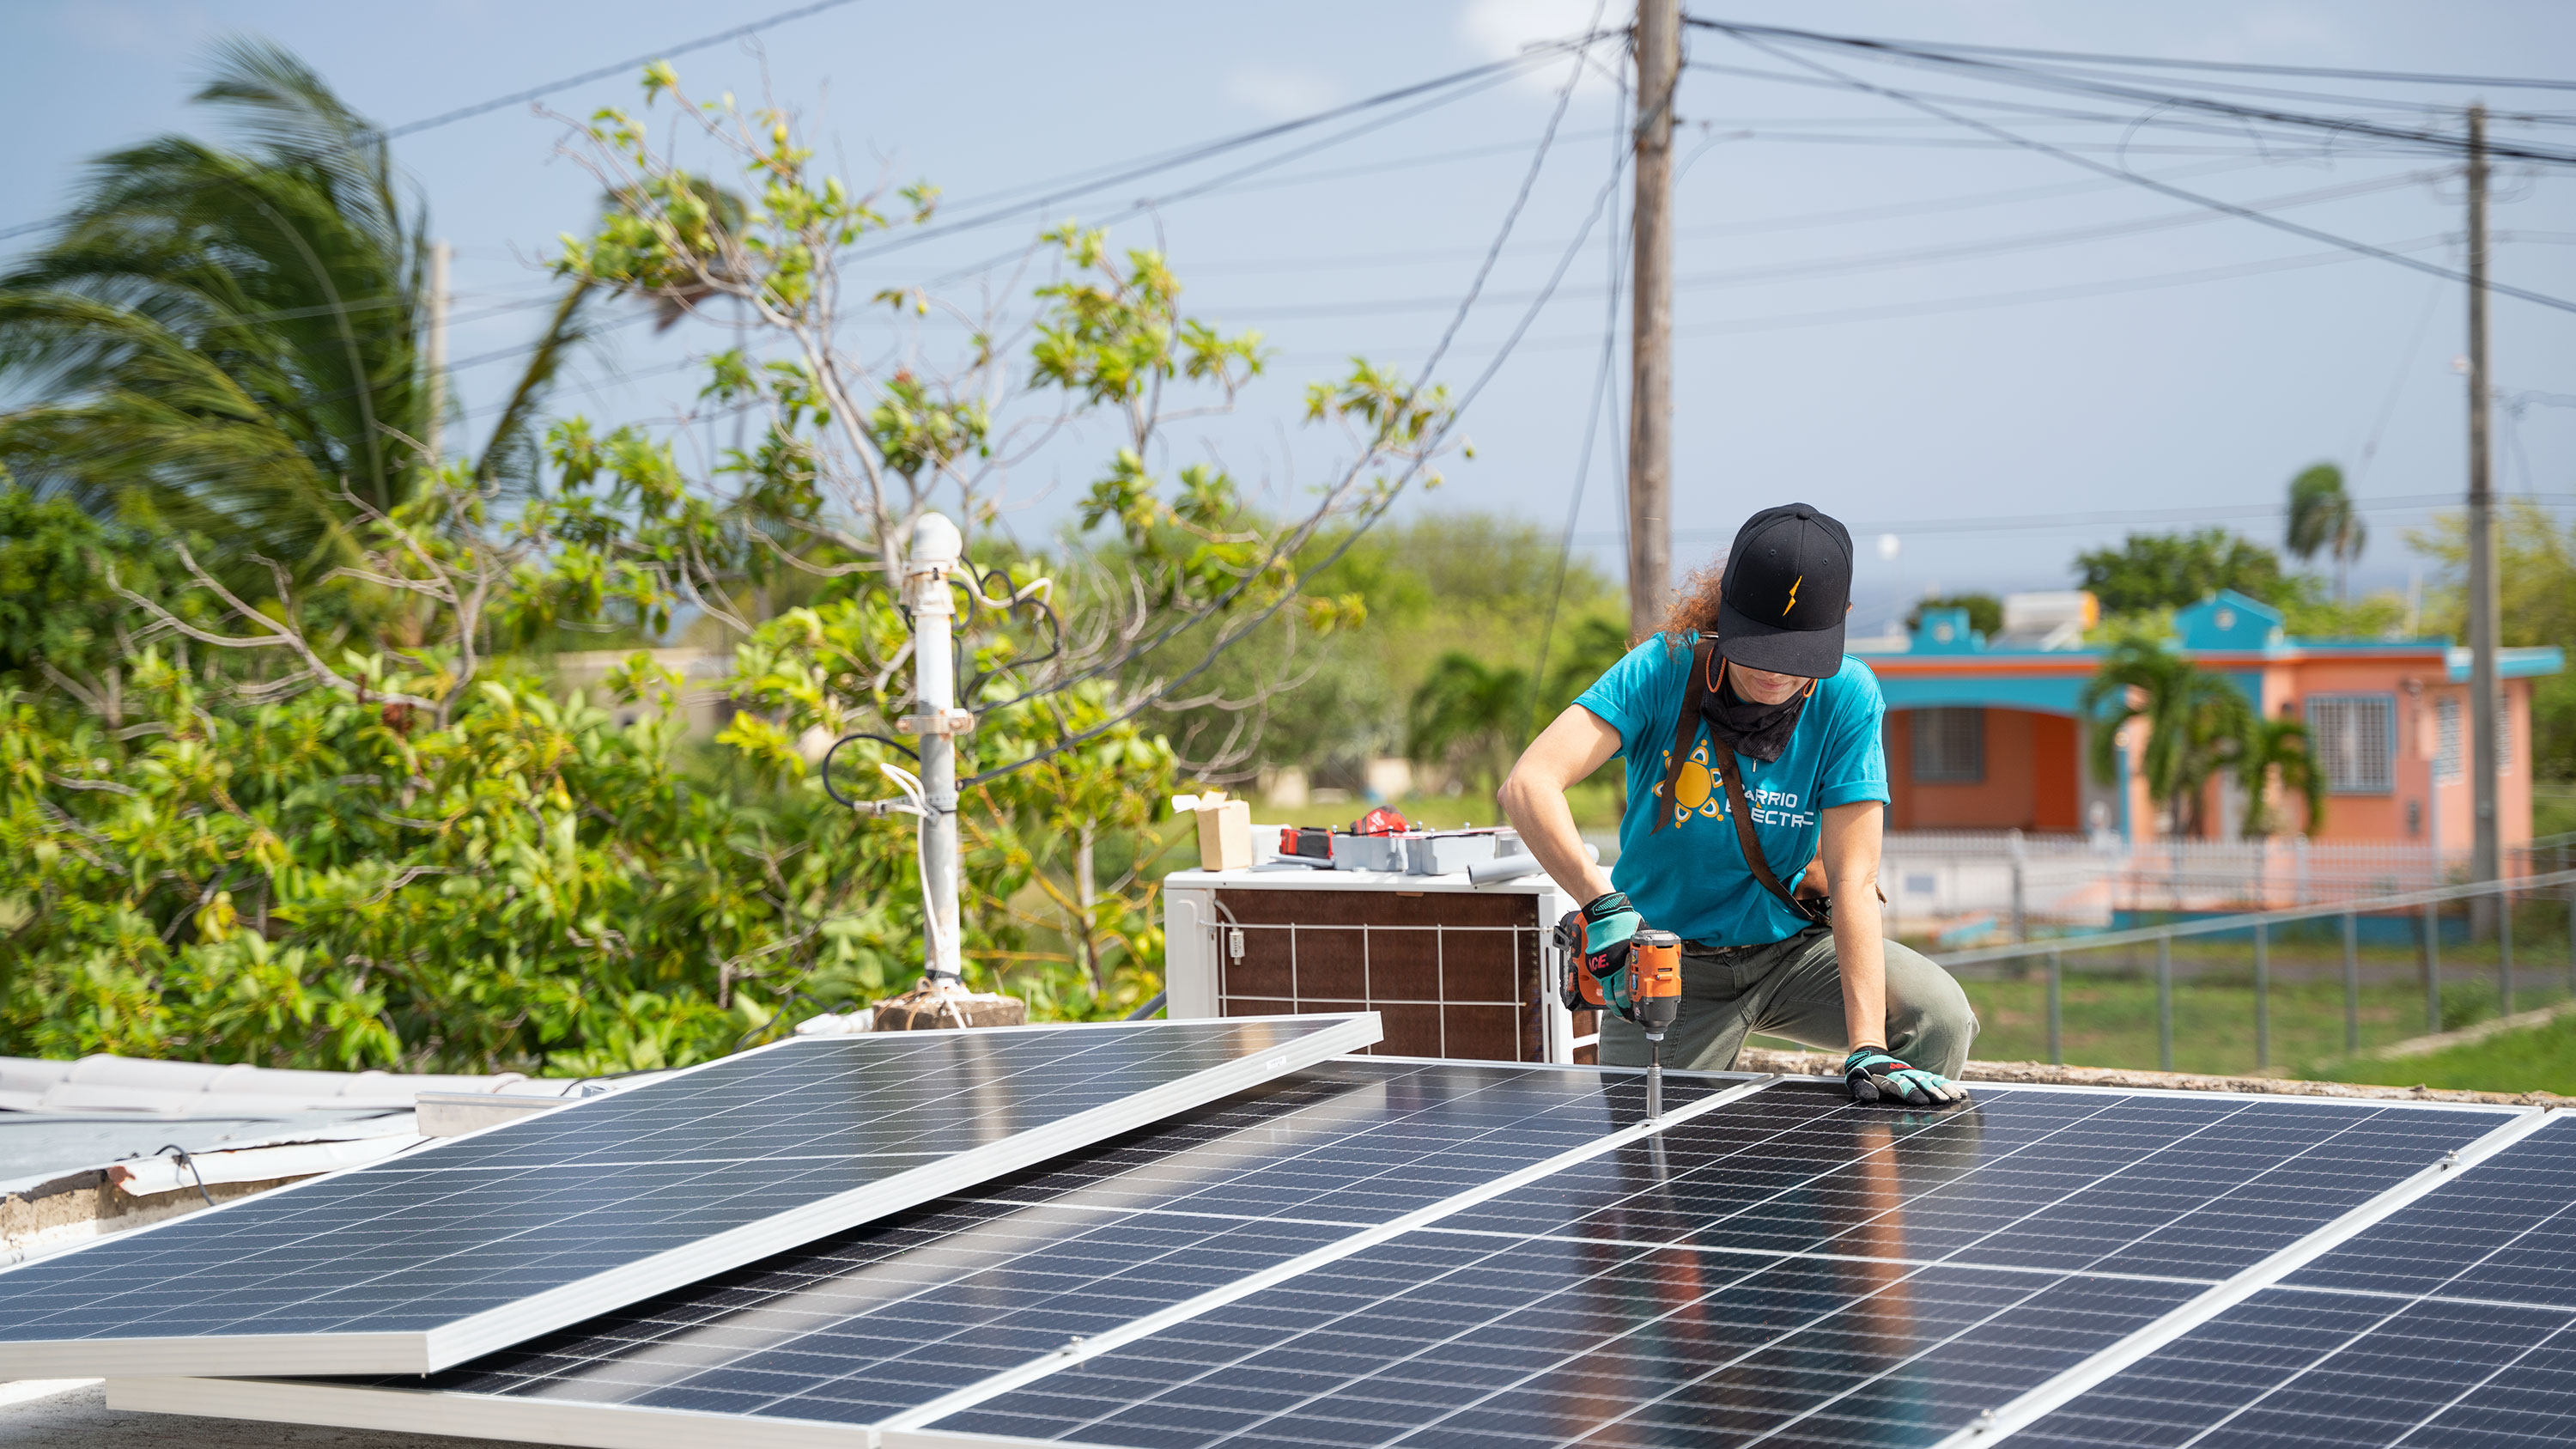 A woman installs solar panels on a roof in Isabela, Puerto Rico.